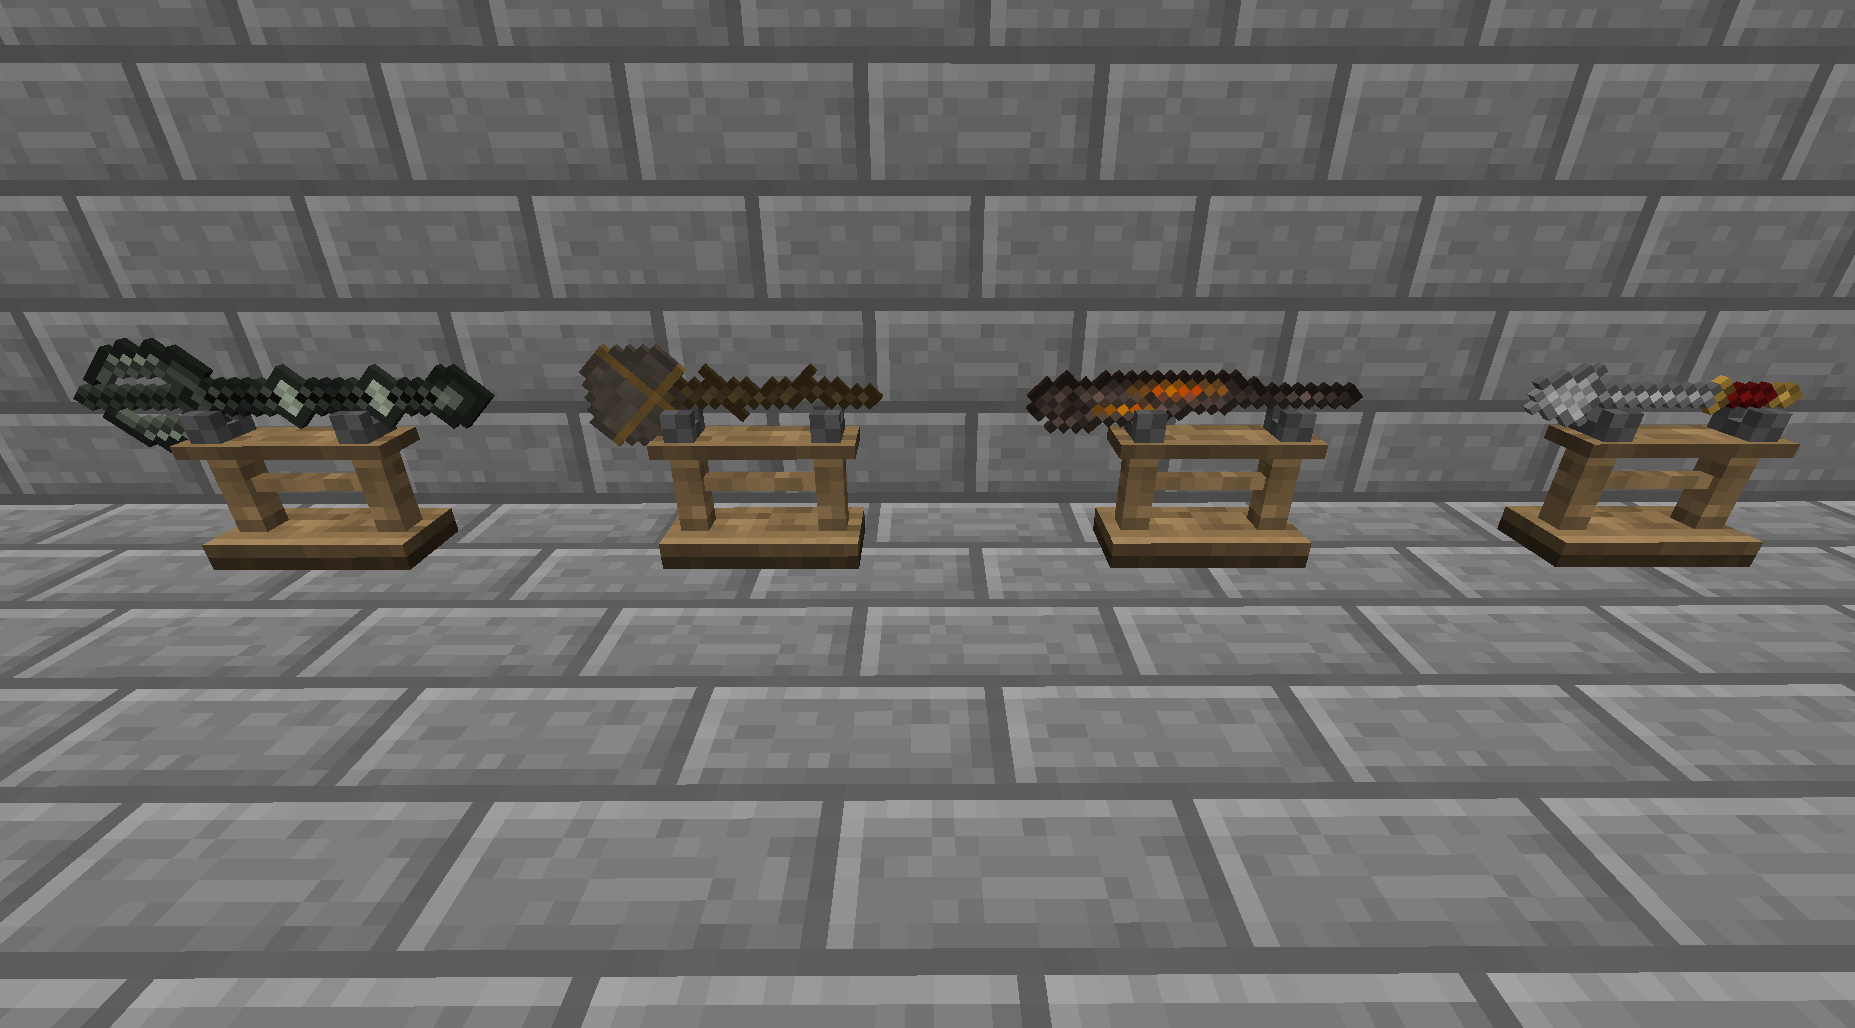 Gondolinian Sword, The Lord of the Rings Minecraft Mod Wiki